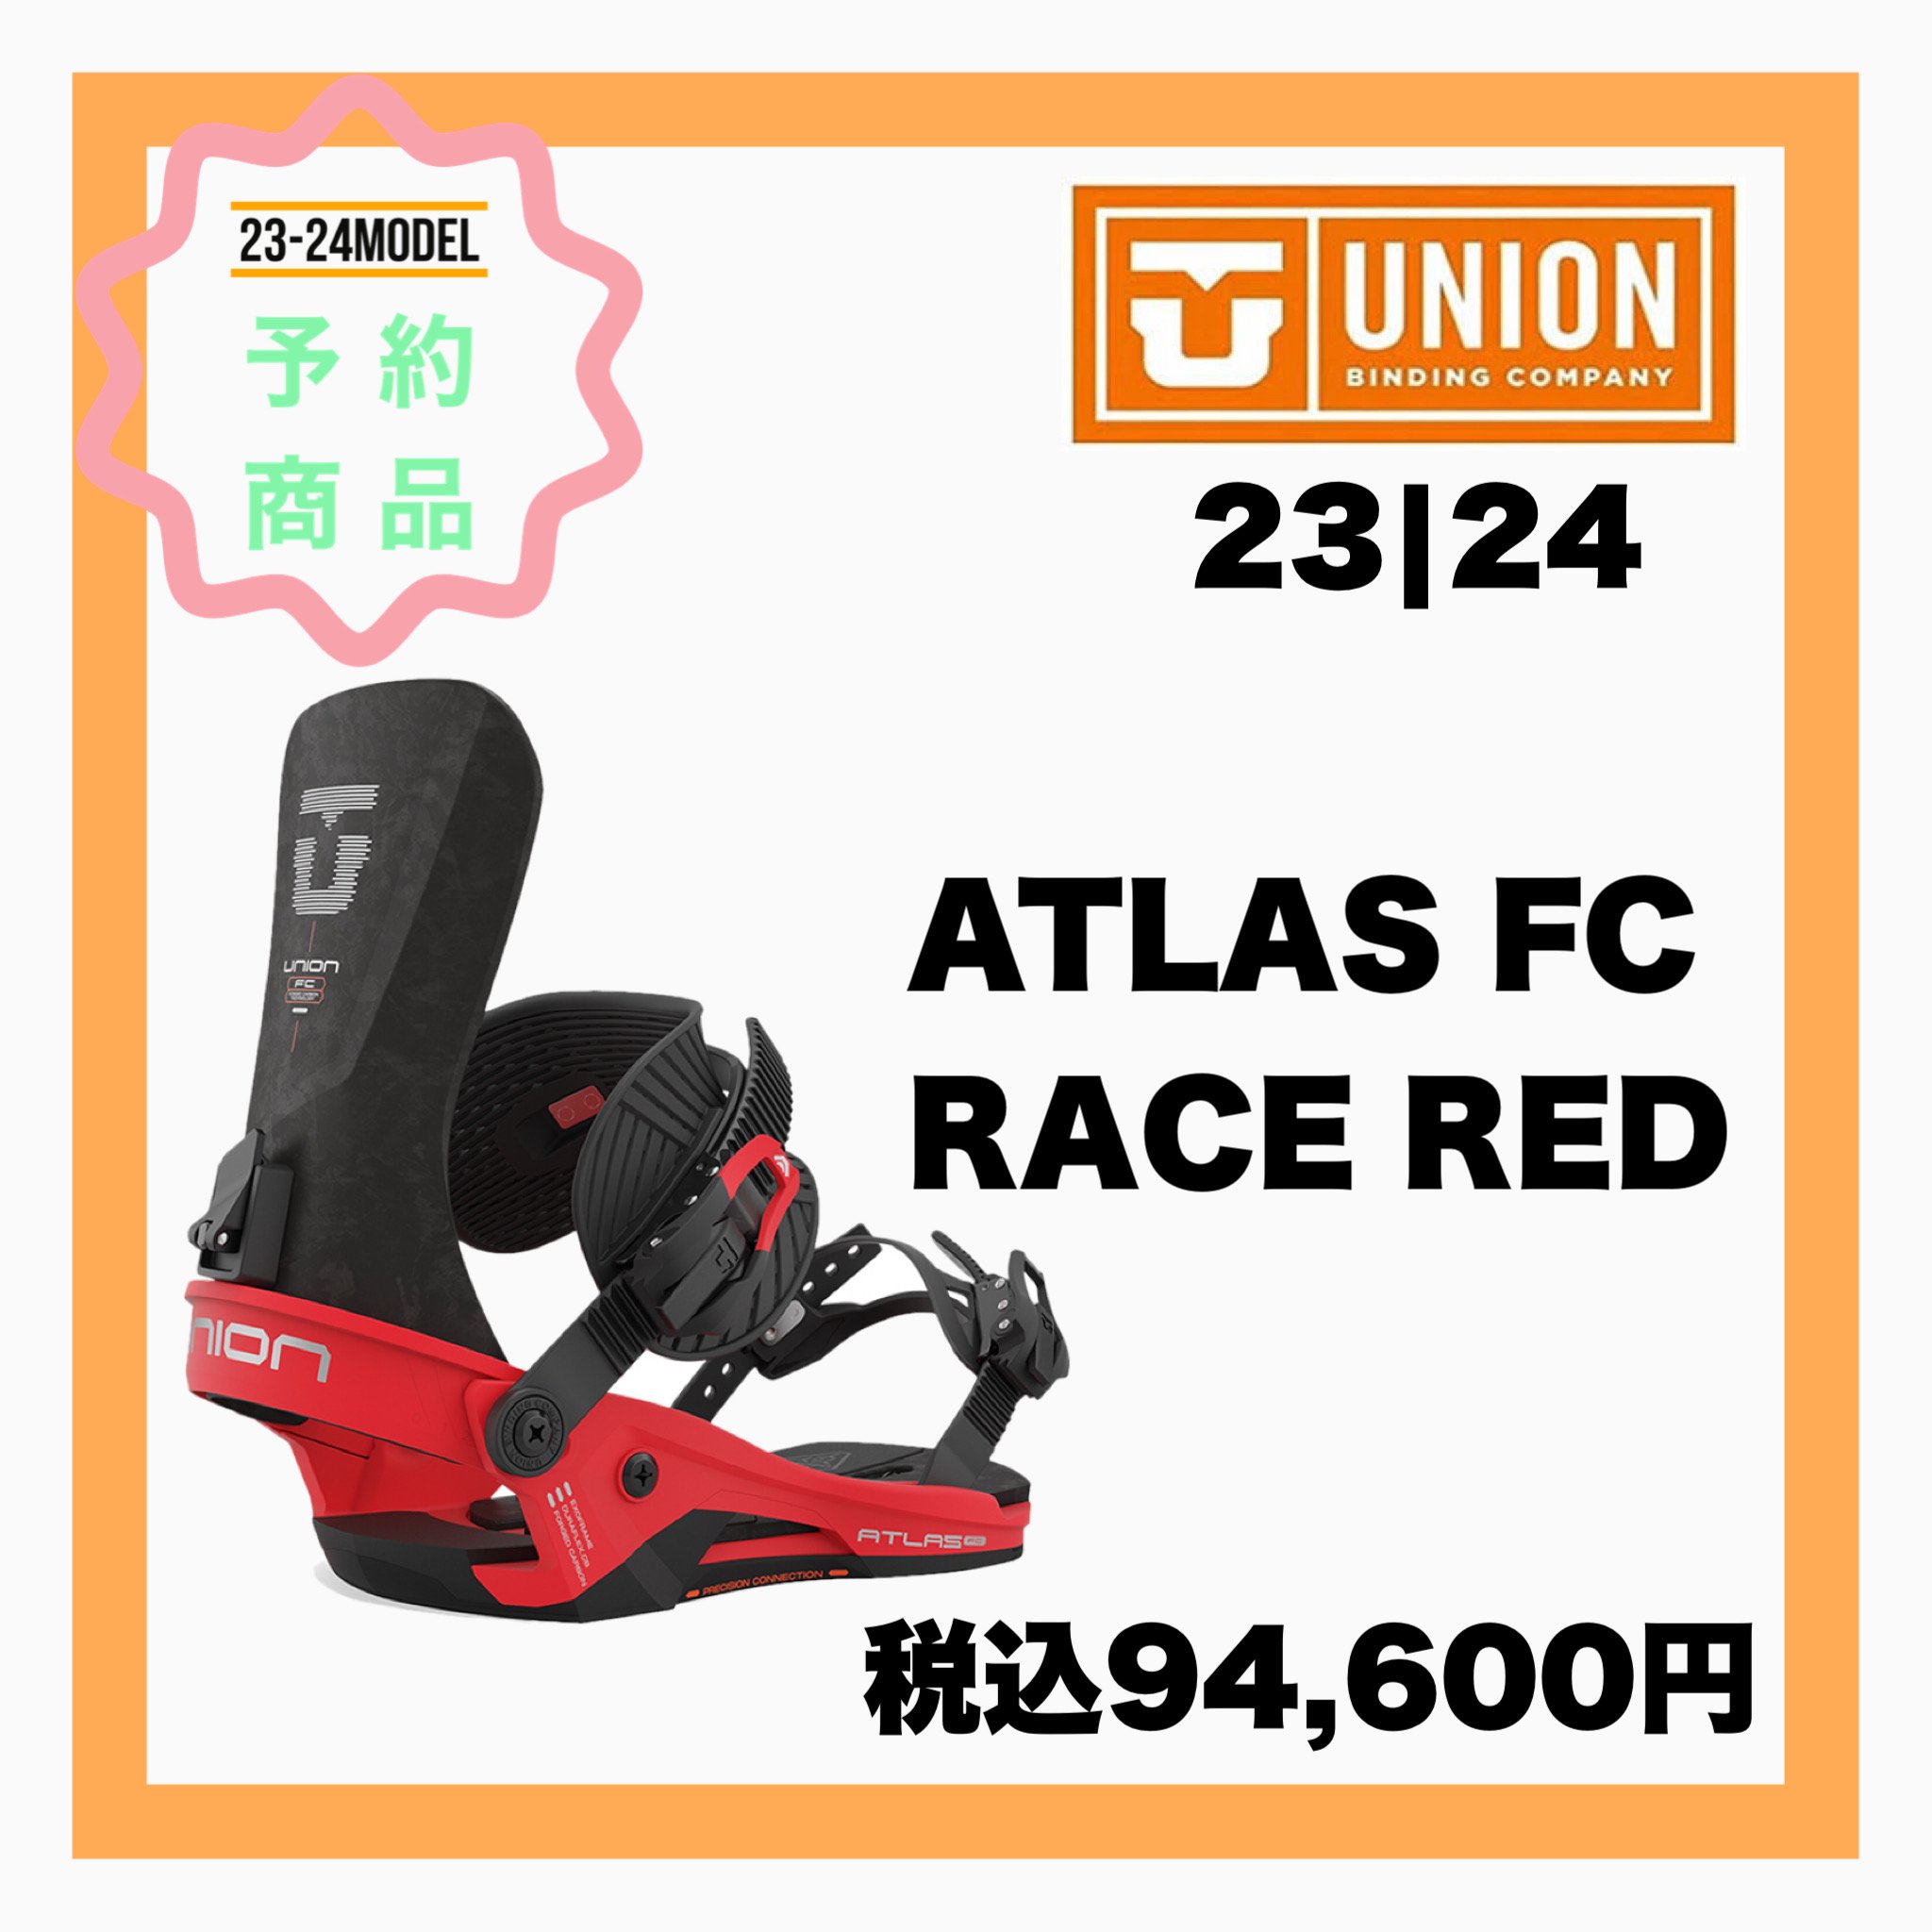 2023-2024 UNION 【 ATLAS FC RACE RED 】 - JOINT HOUSE